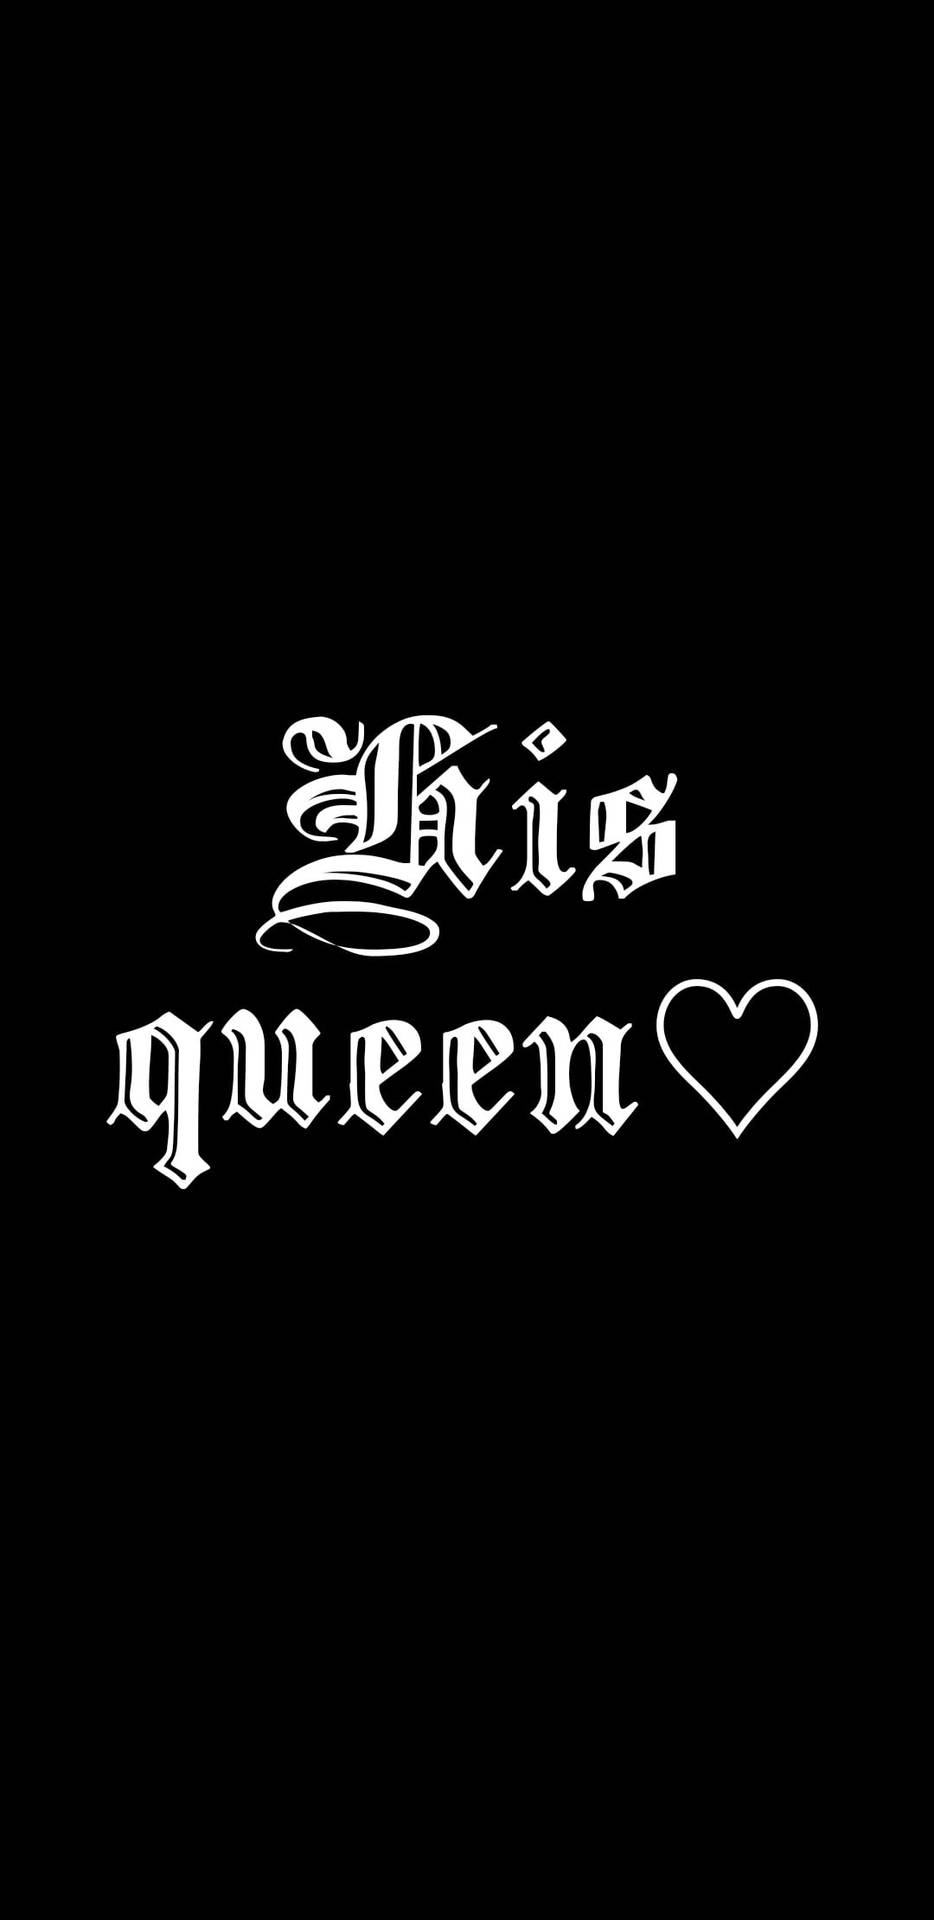 Black Queen Background With Heart Background